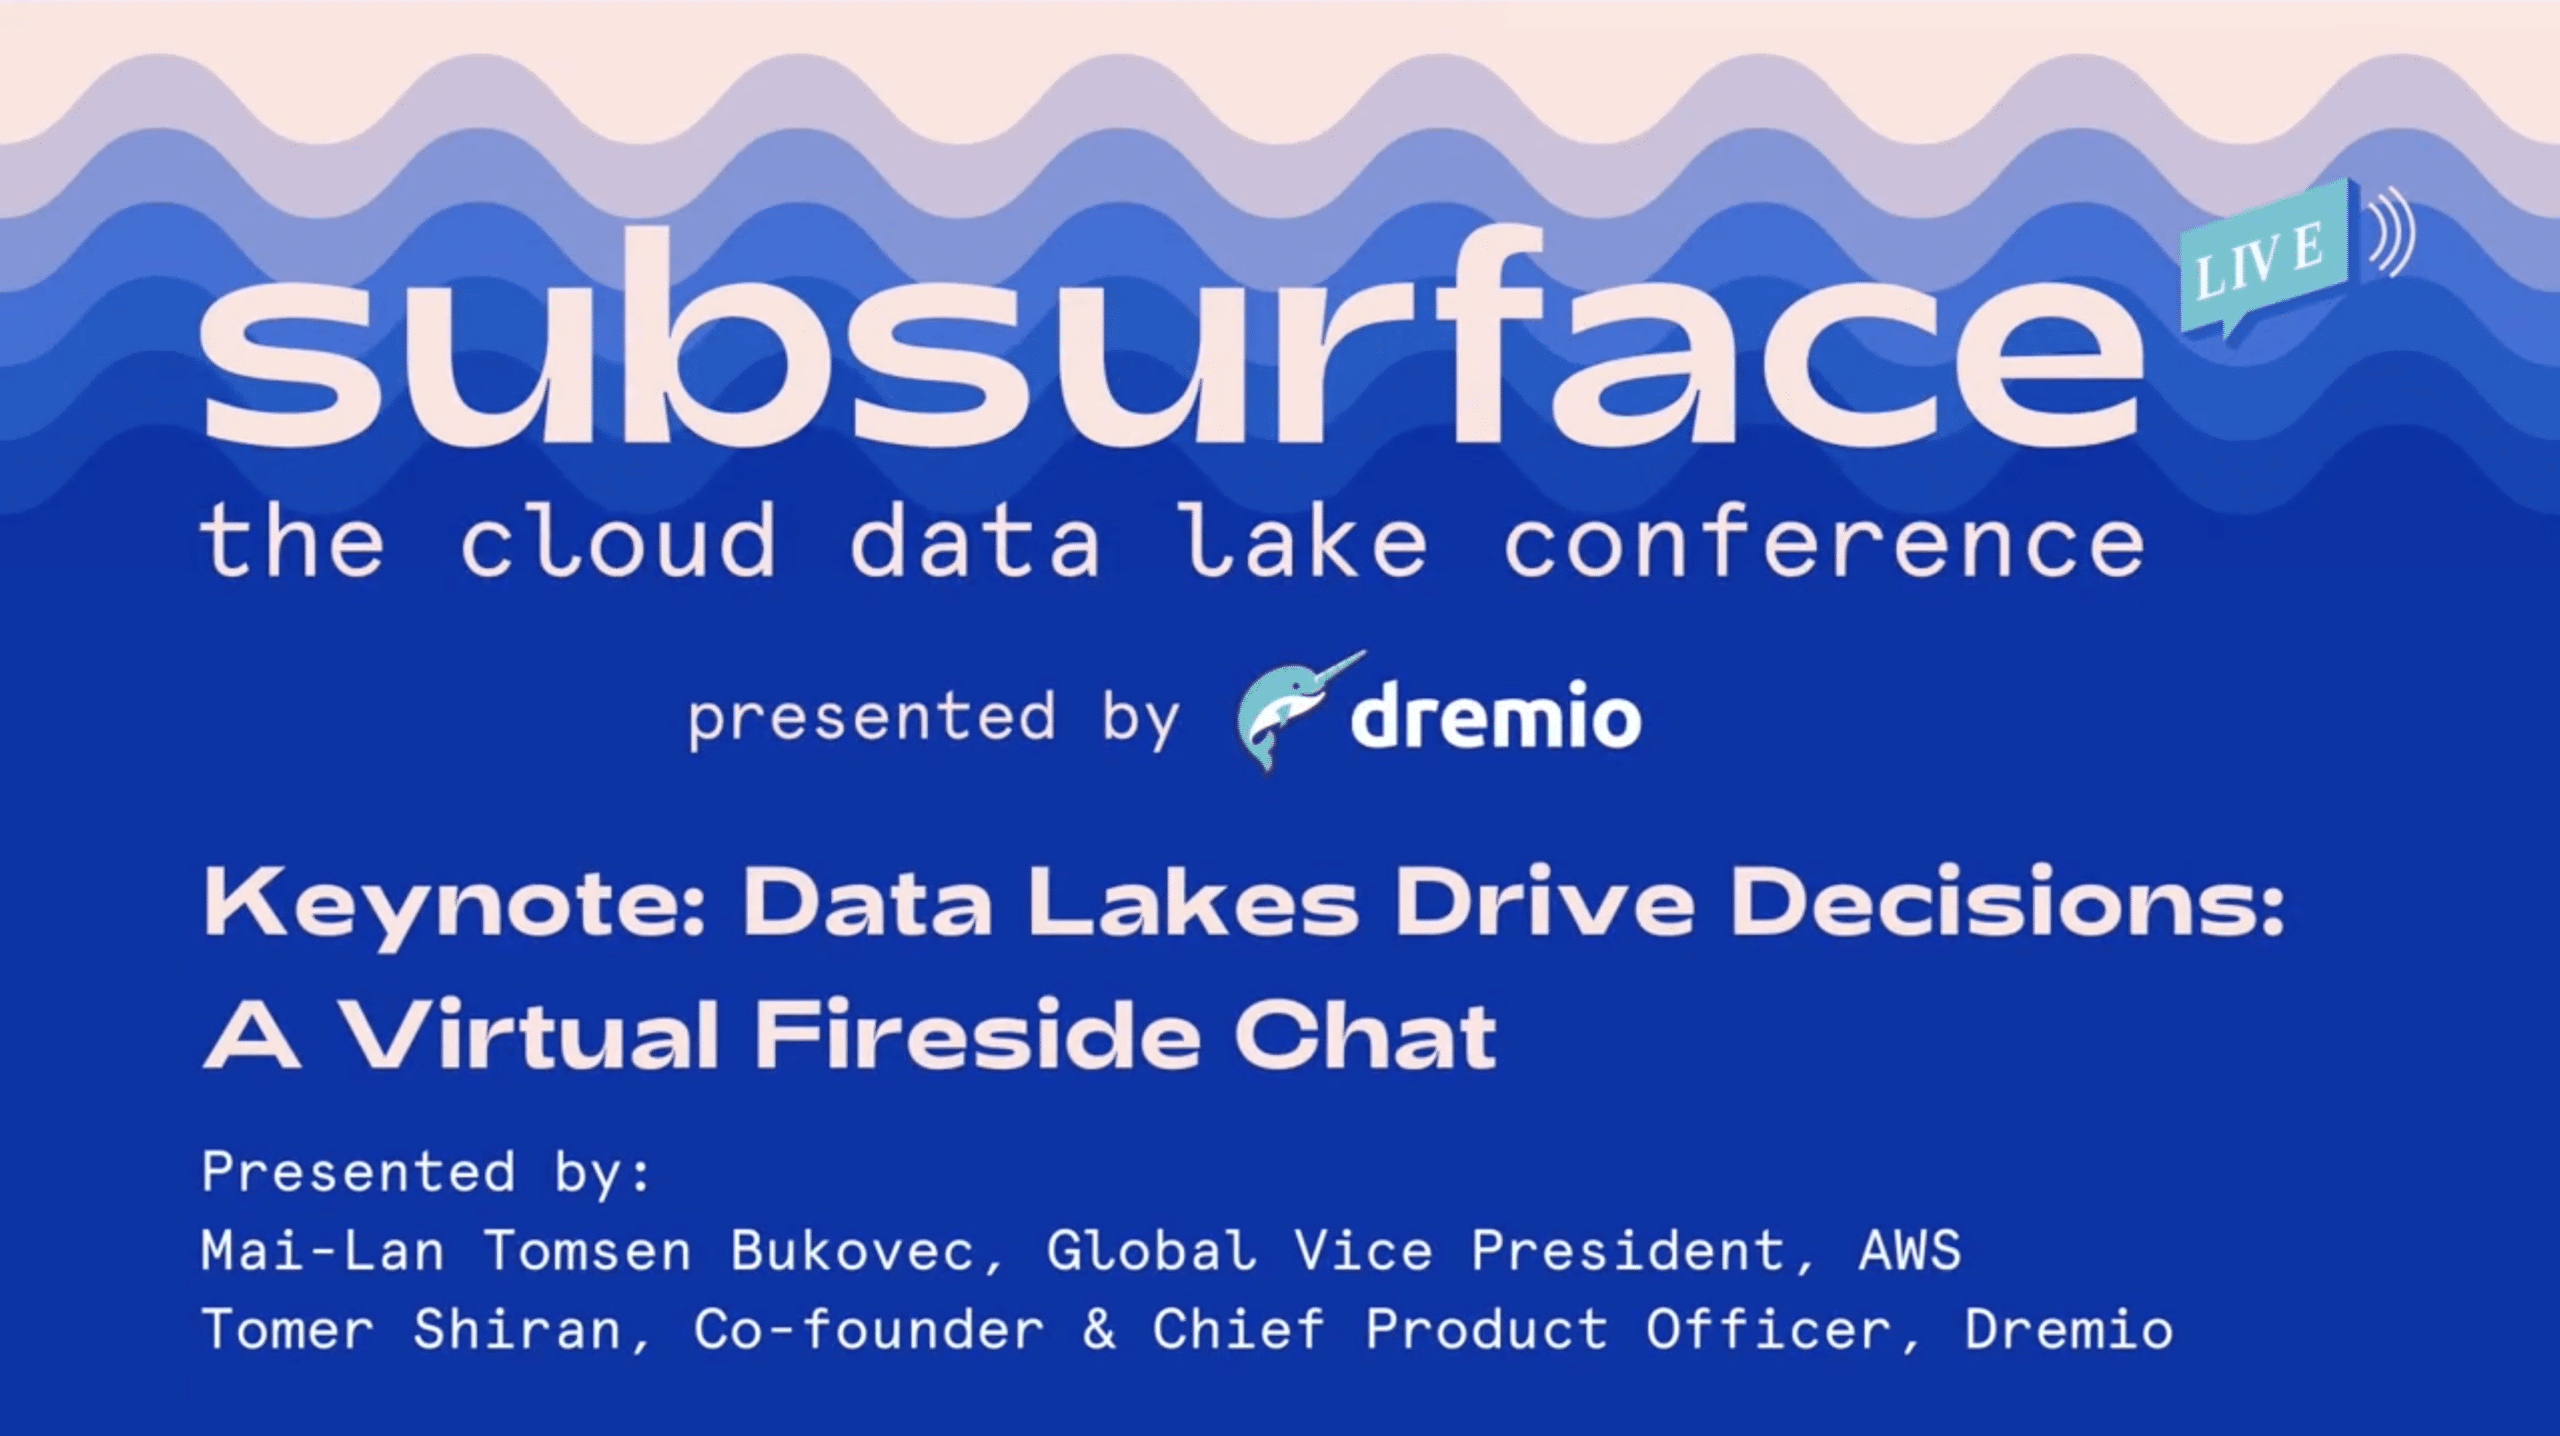 Data Lakes Drive Decisions: A Virtual Fireside Chat